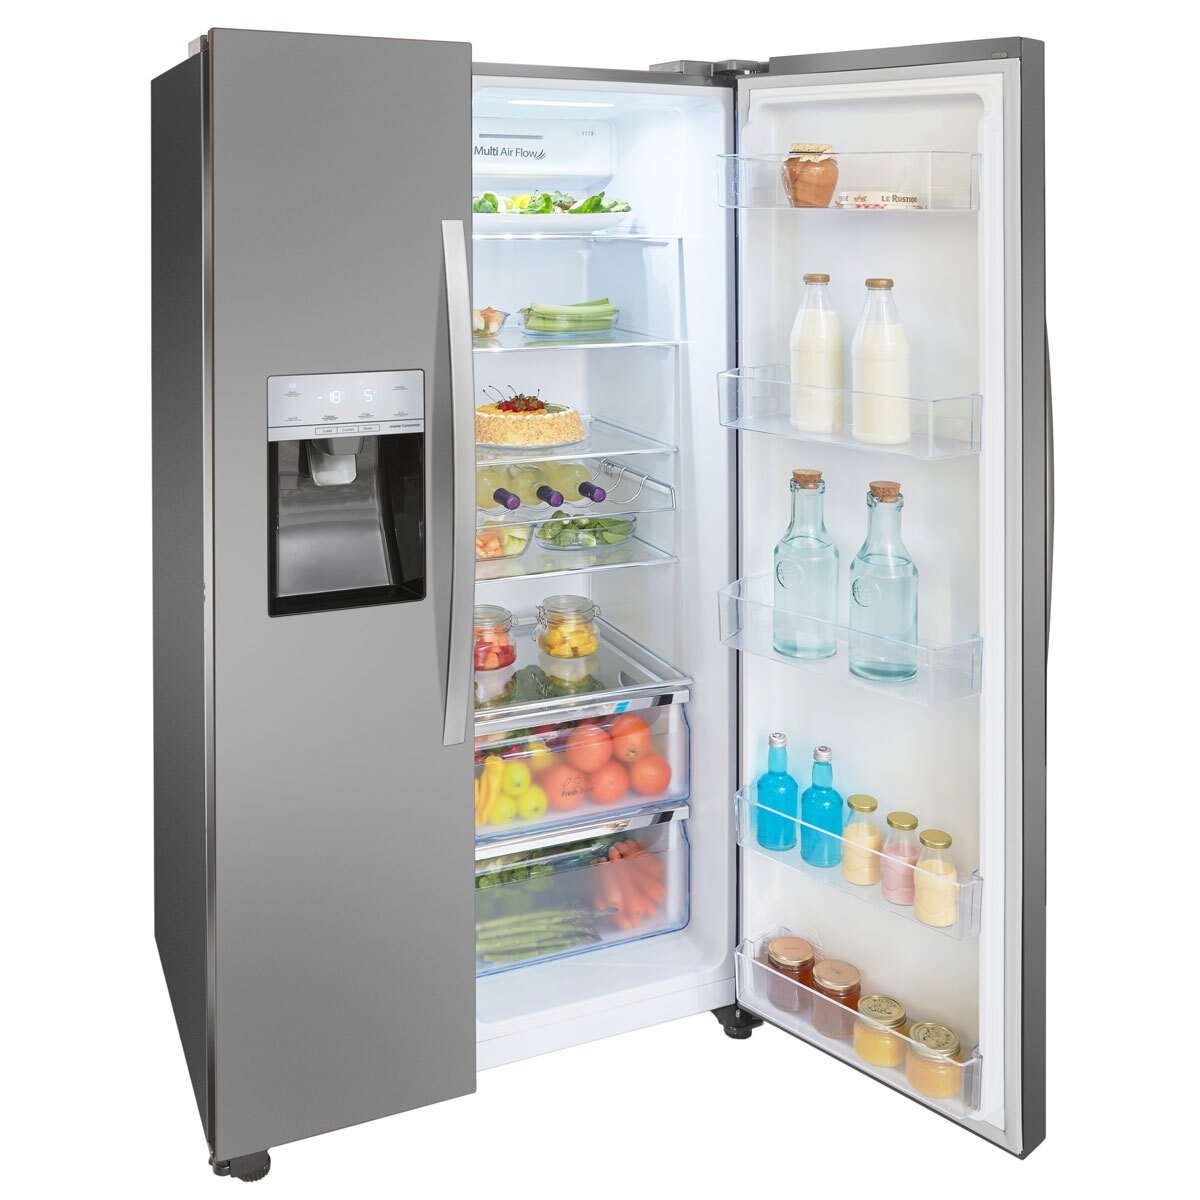 Hisense RS694N4IIF, Side by Side Fridge Freezer A+ Rating in Stainless Steel - Signature Retail Stores